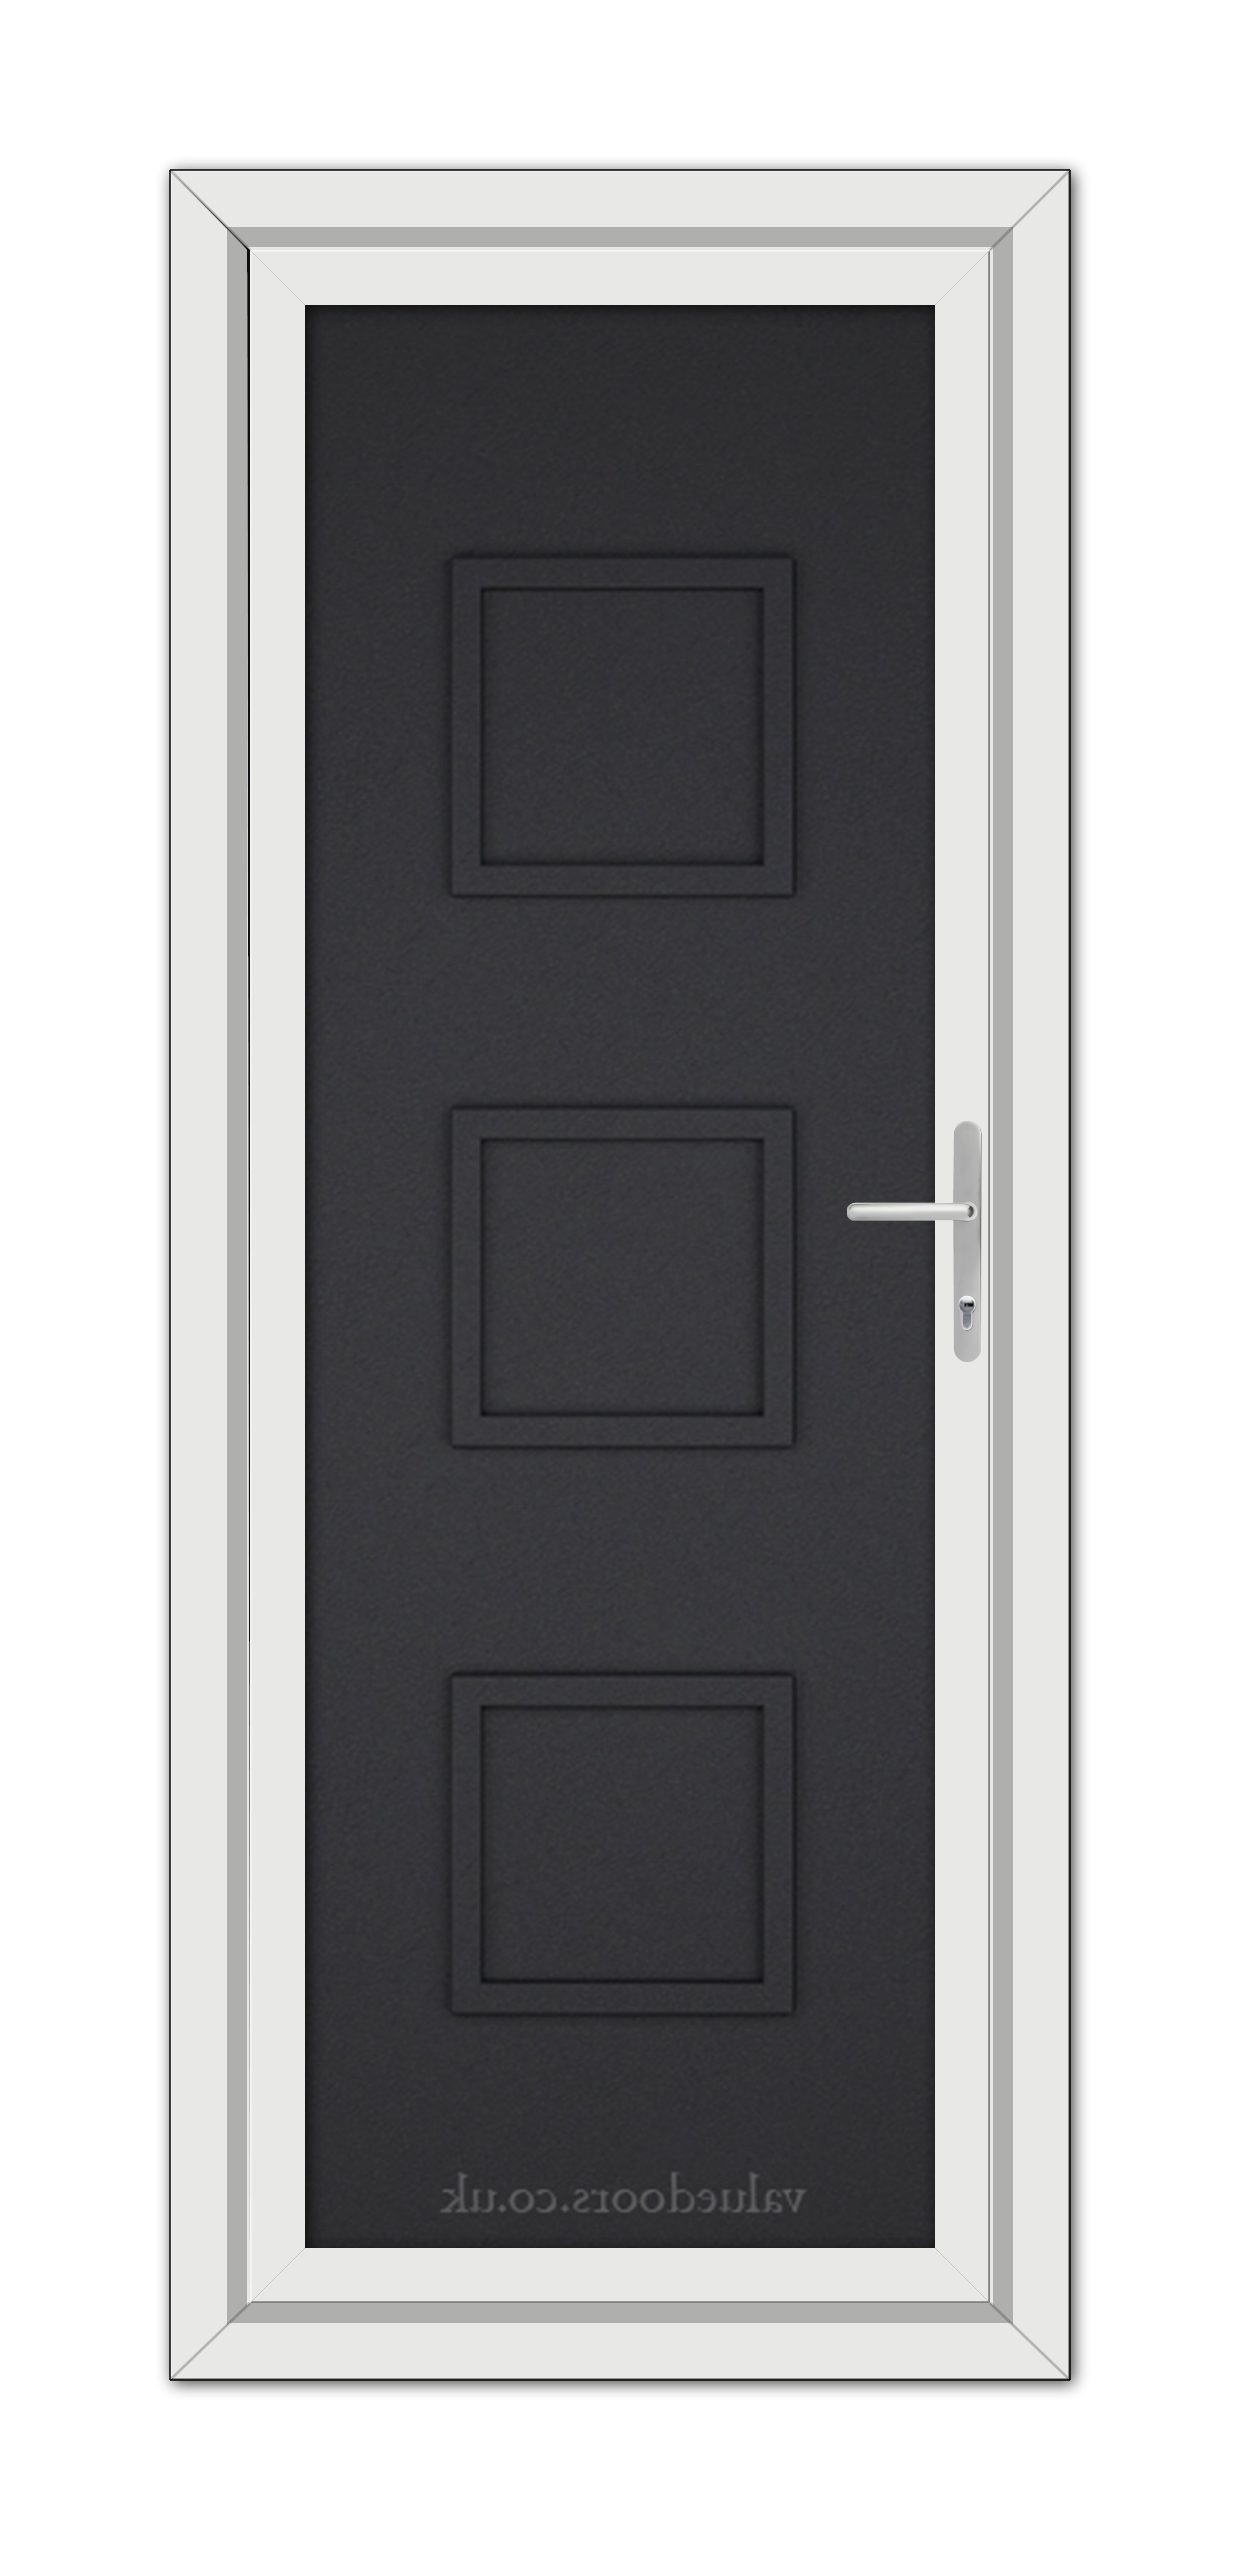 A vertical image of a Black Brown Modern 5013 Solid uPVC door with three recessed panels and a silver handle, framed in a white door frame.